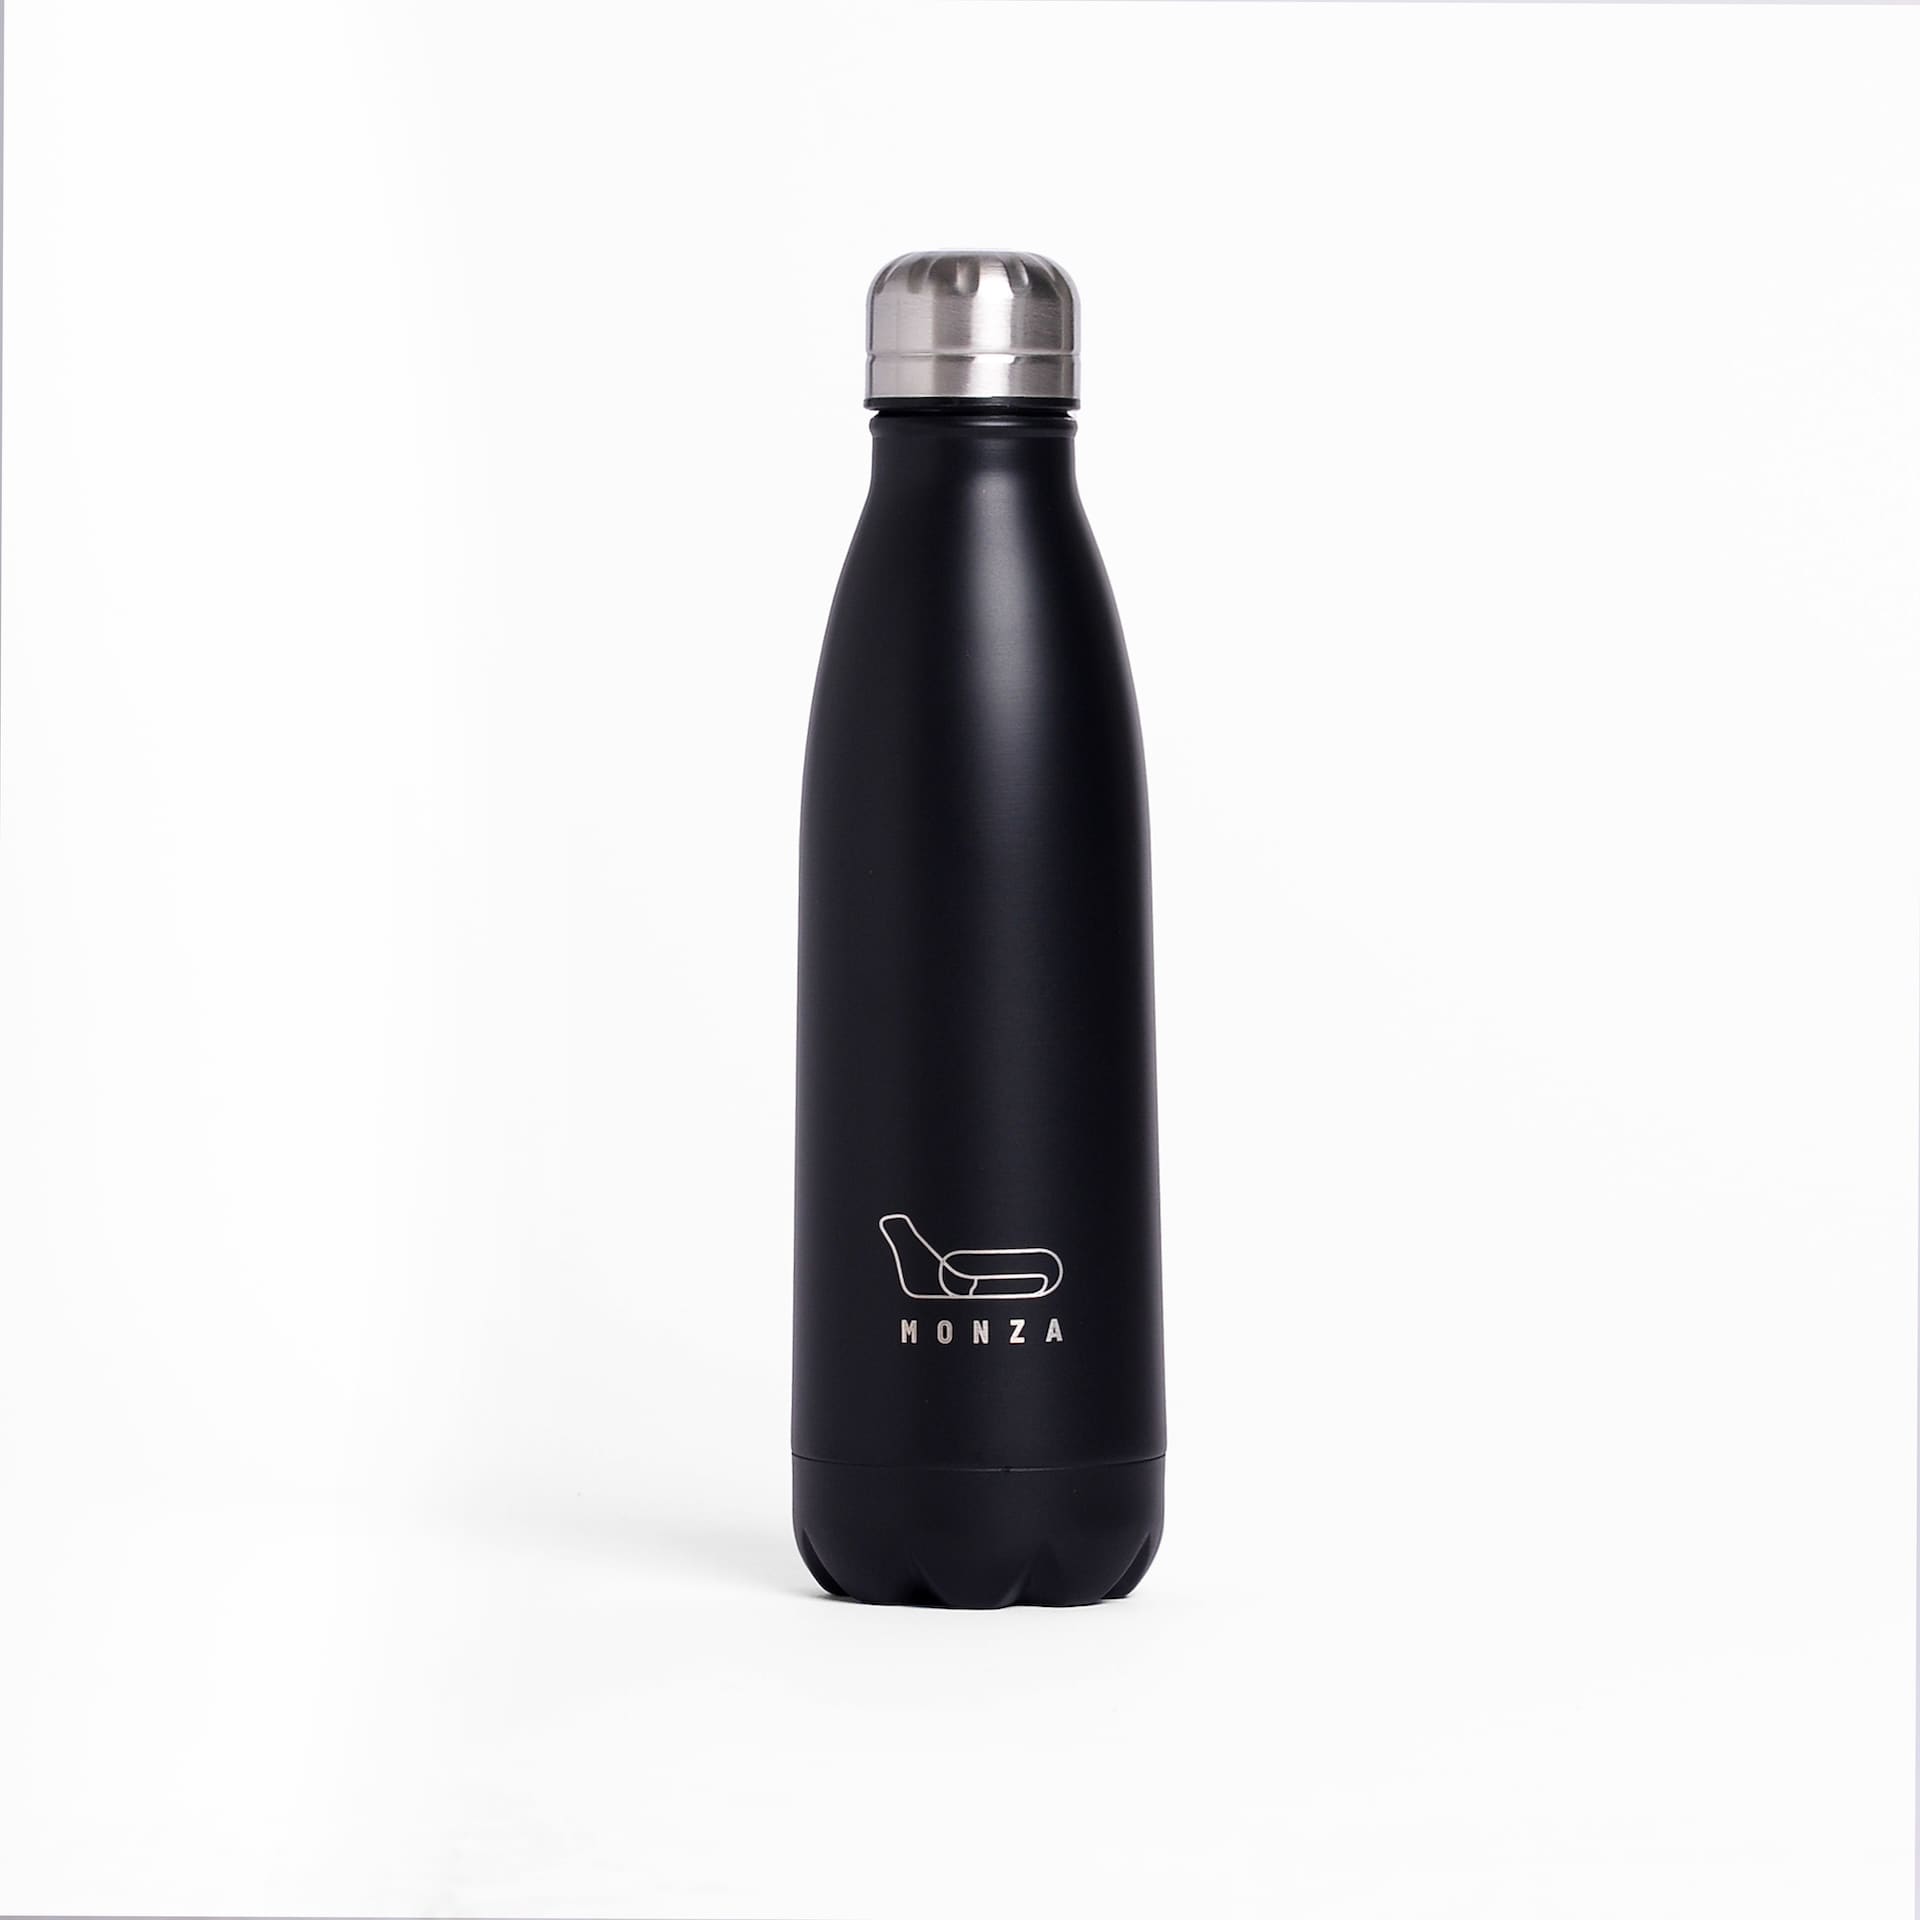 Monza thermal double wall thermal bottle